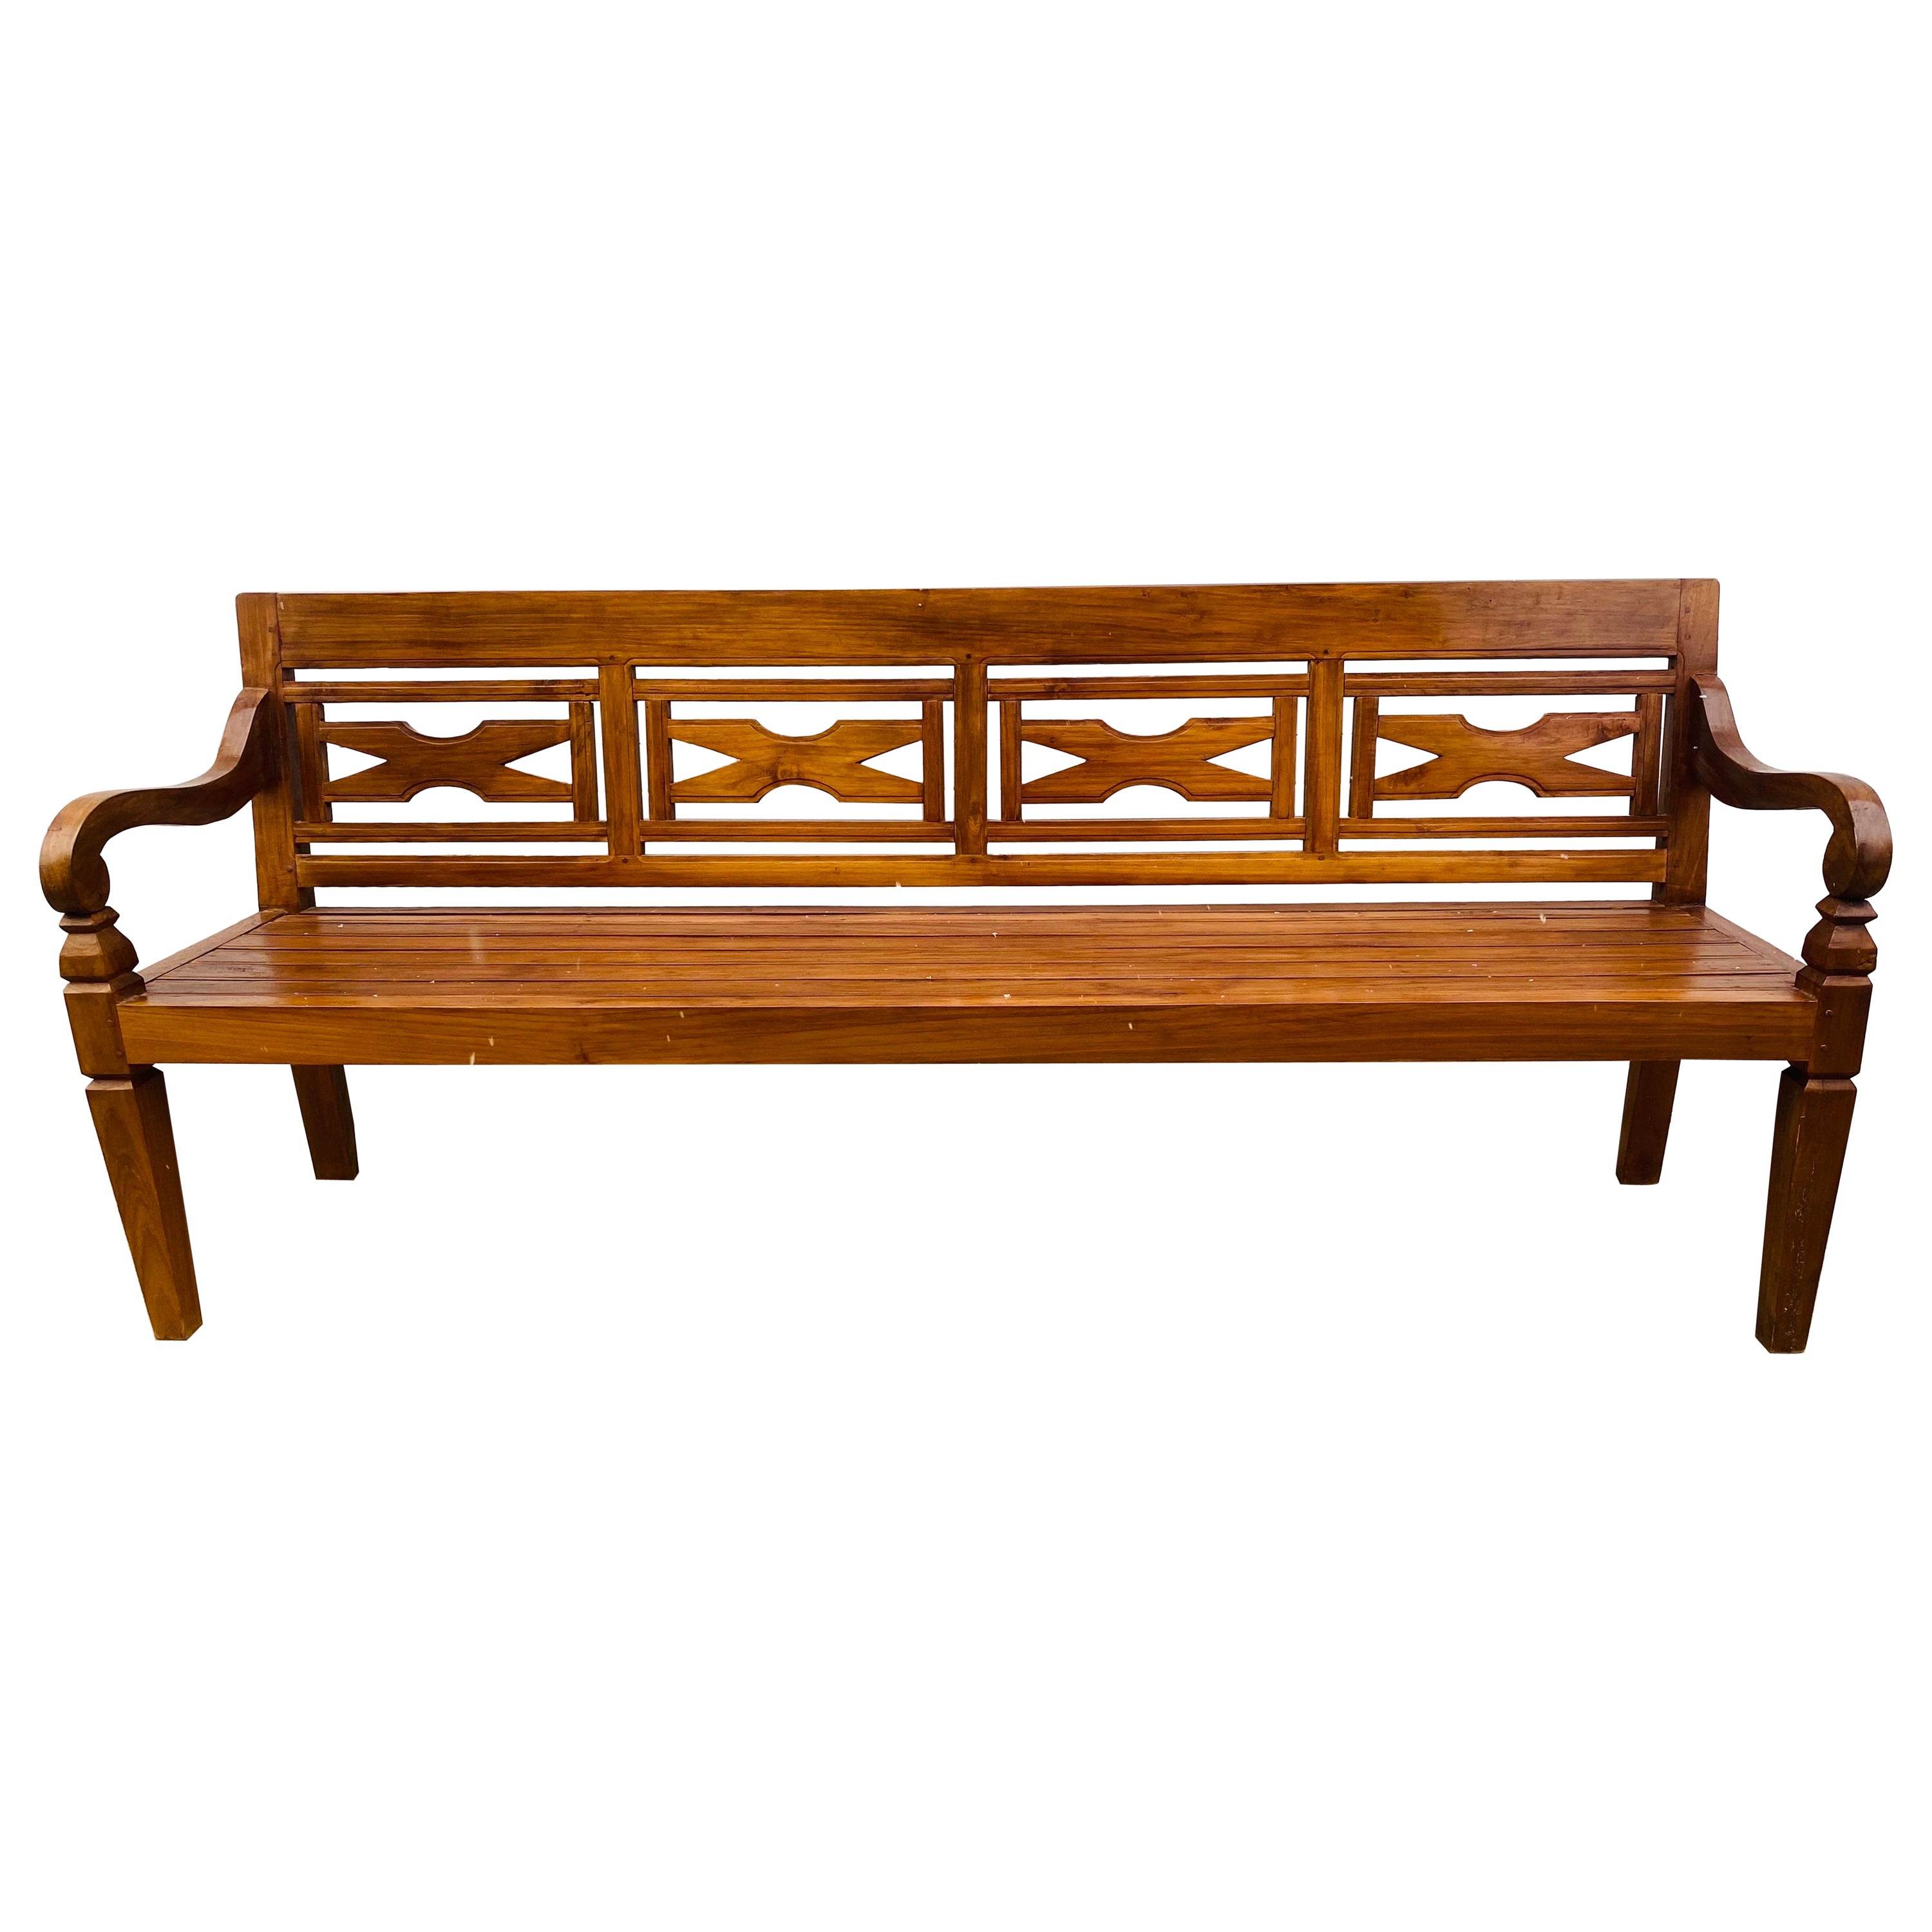 Late 20th century hand carved teak decorator bench.